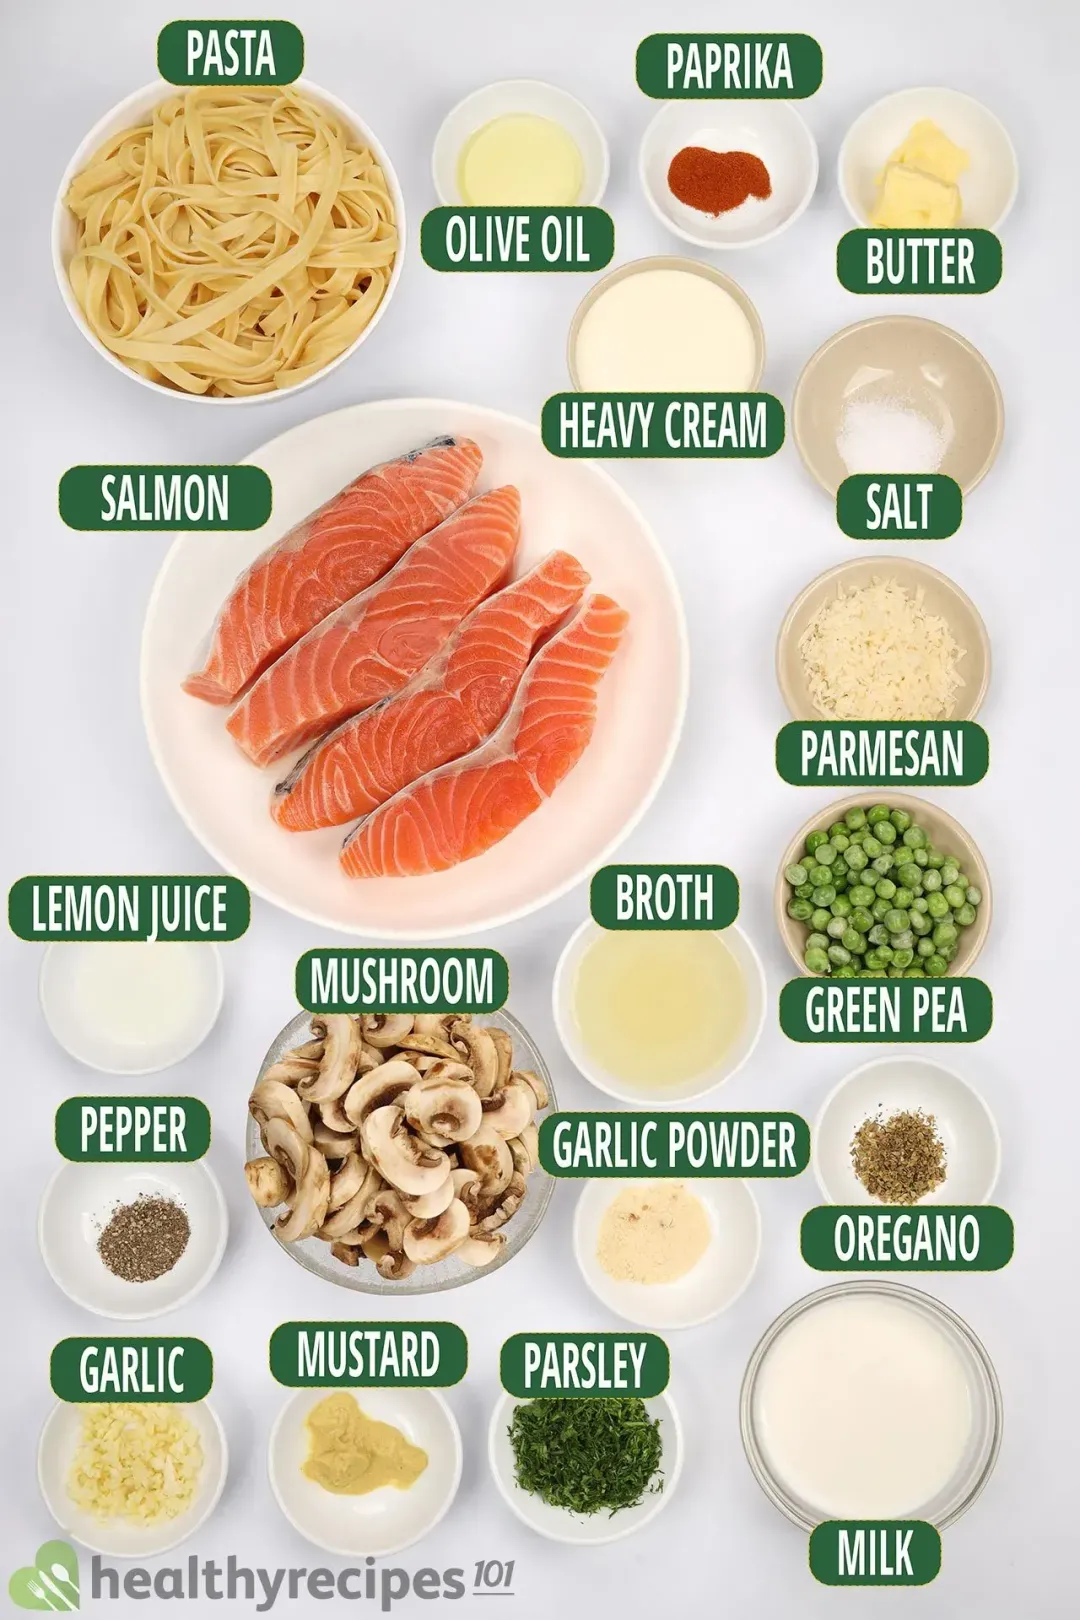 A round plate containing four raw salmon fillets, a bowl of sliced white mushrooms, a bowl of green peas, and a bowl of fettuccine pasta laid near various condiments